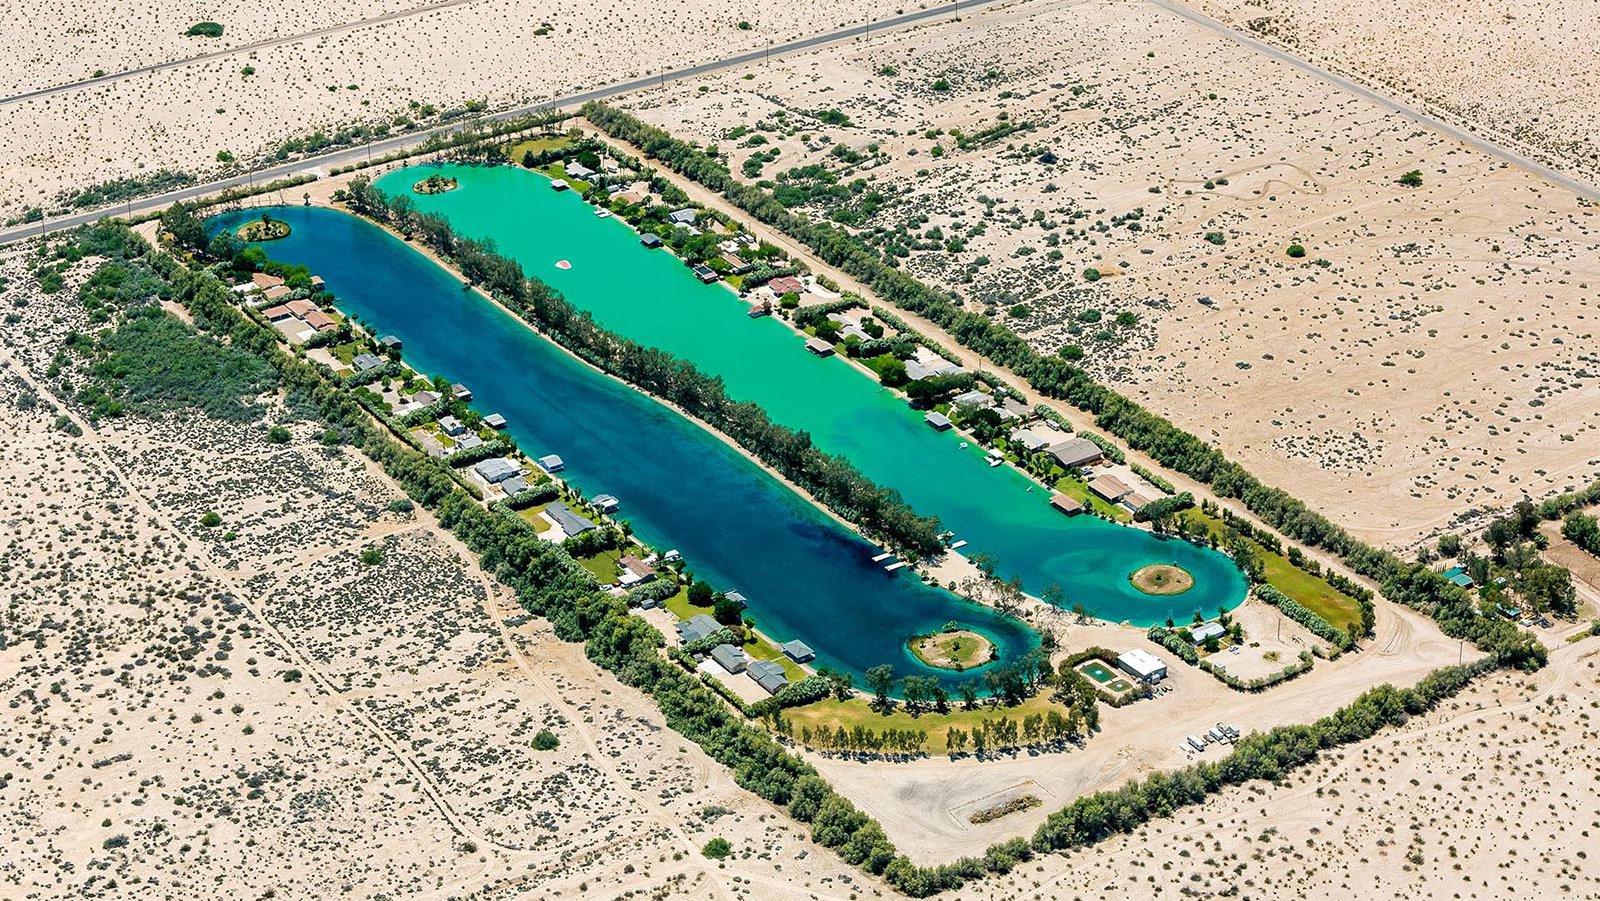 Residential real estate photo of the Imperial Lakes community and its water ski lakes in El Centro, California